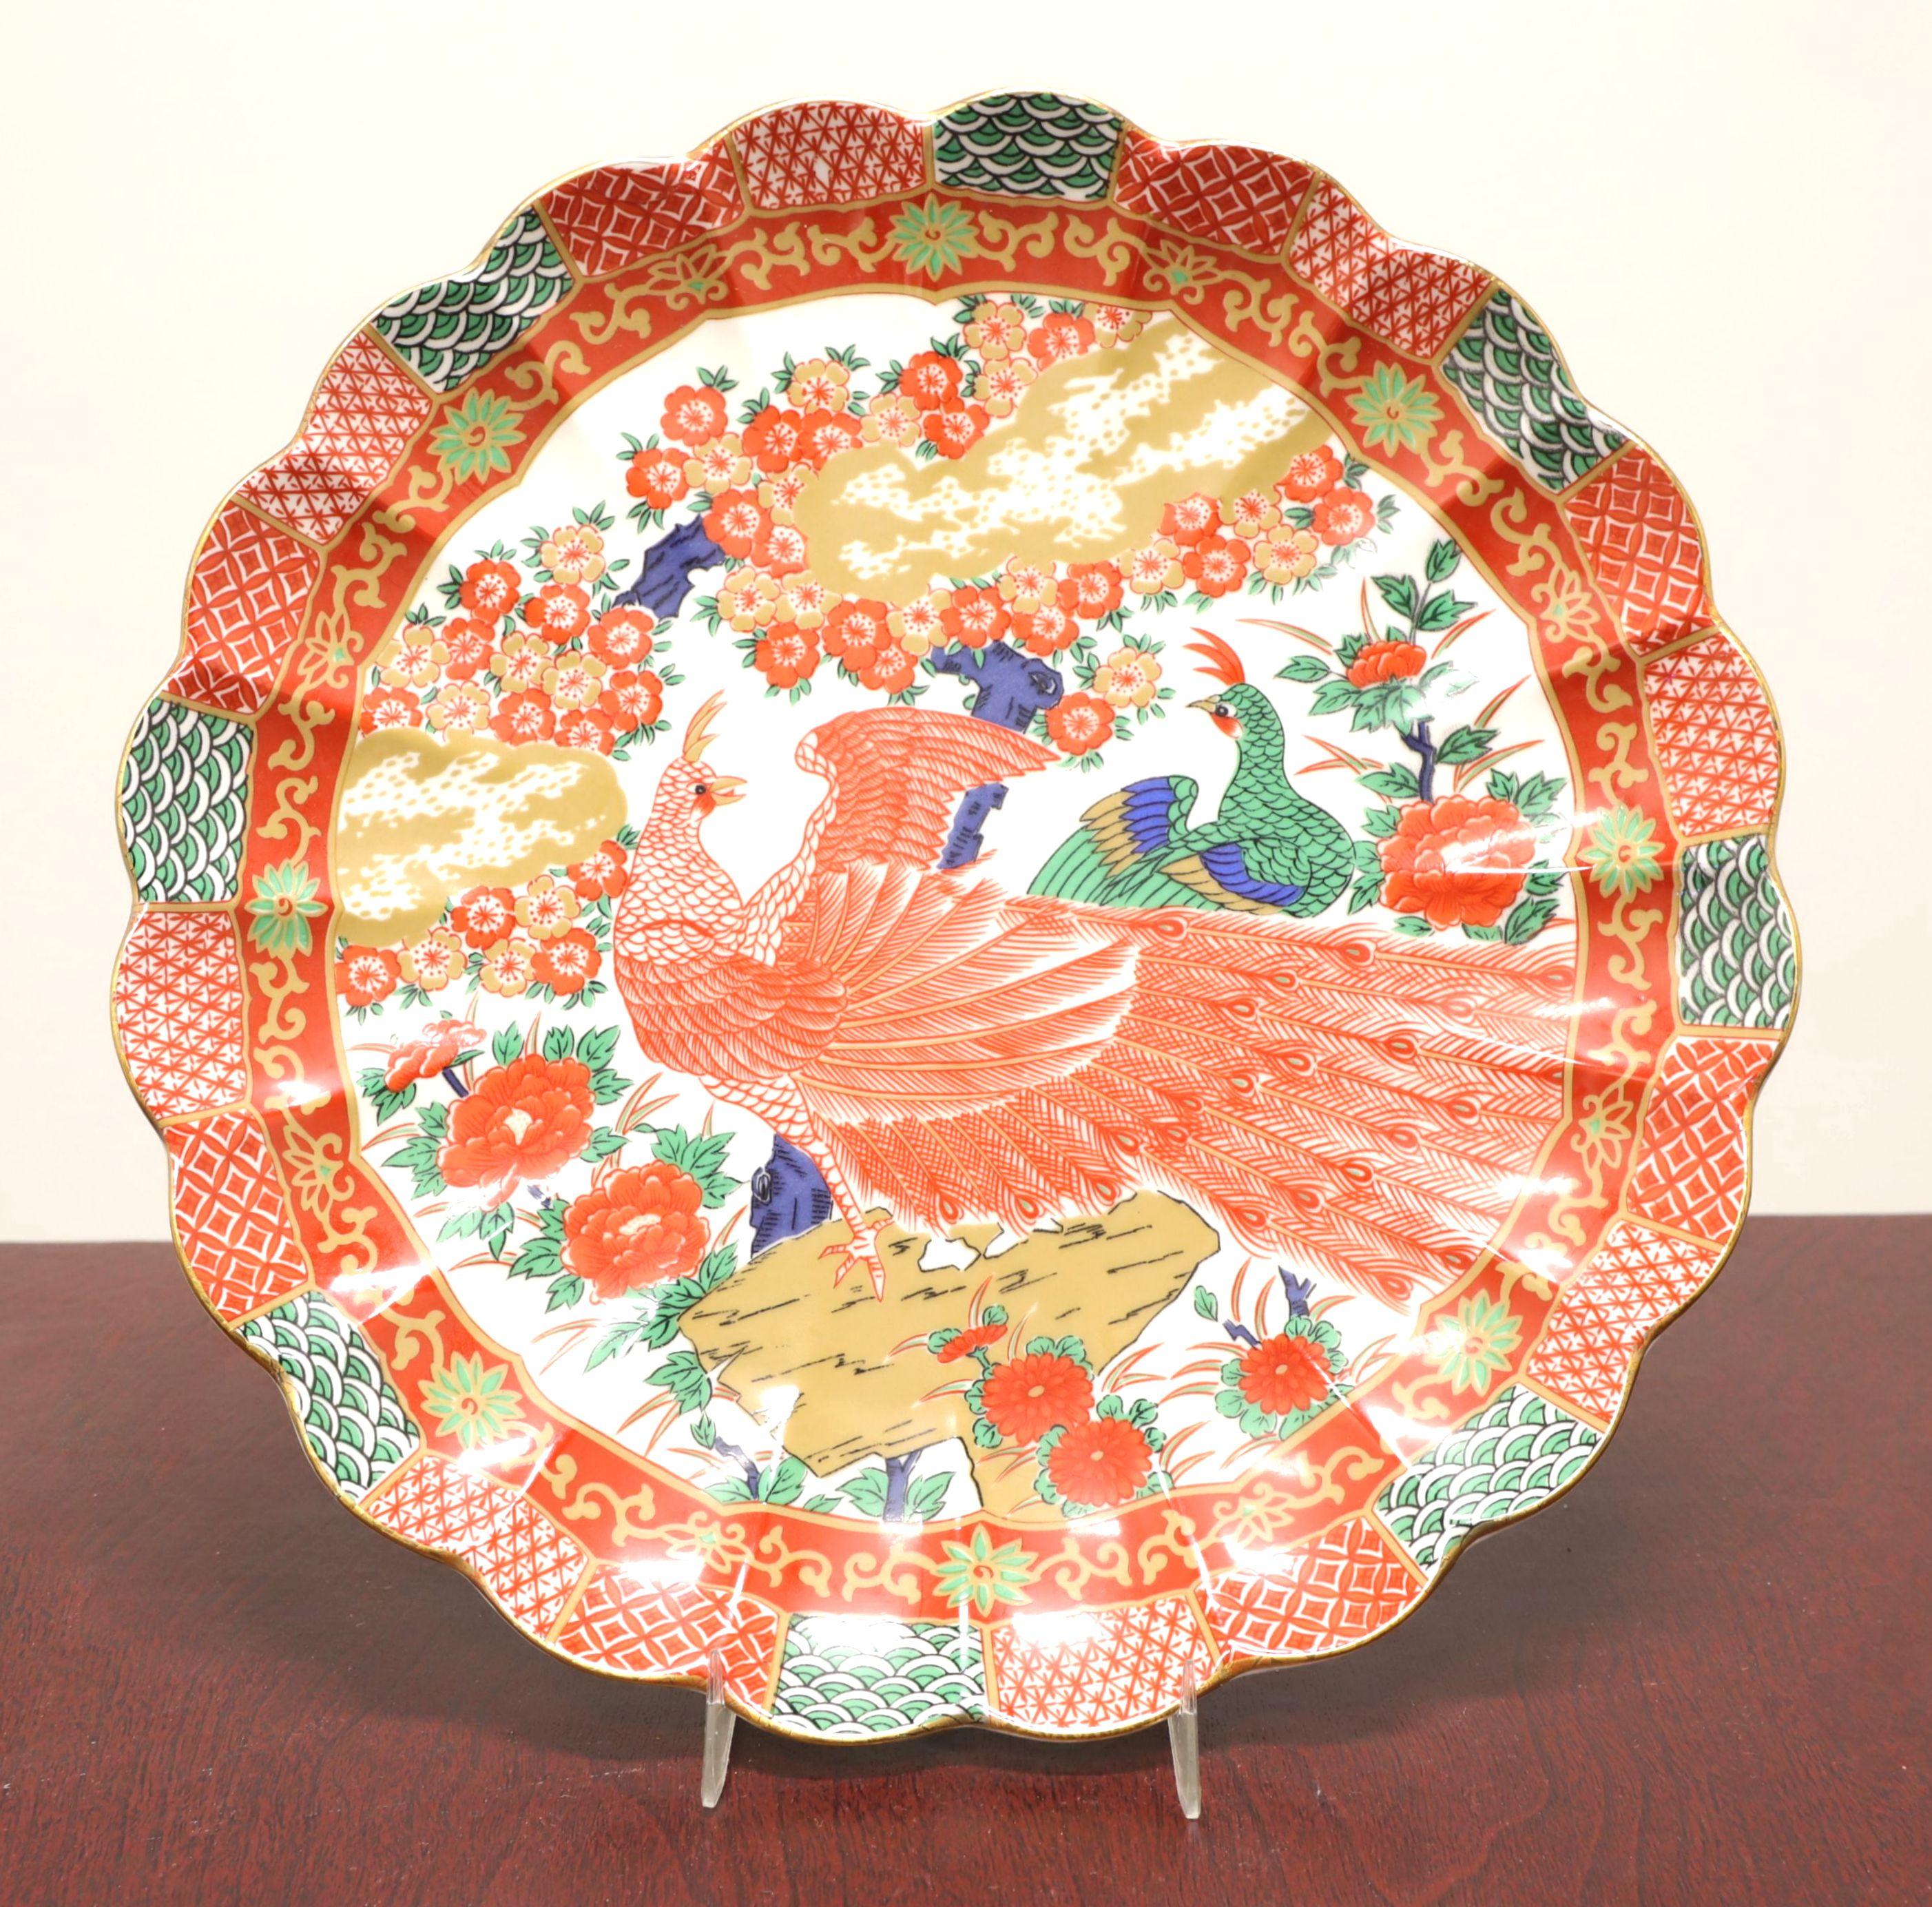 A set of Mid 20th Century Asian style serving pieces by Arita Fine China. Fine reproduction Imari ware porcelain; hand painted in orange, white, green, blue & gold colors of a peacocks design, consisting of two pieces: Chop Plate and Vegetable Bowl.